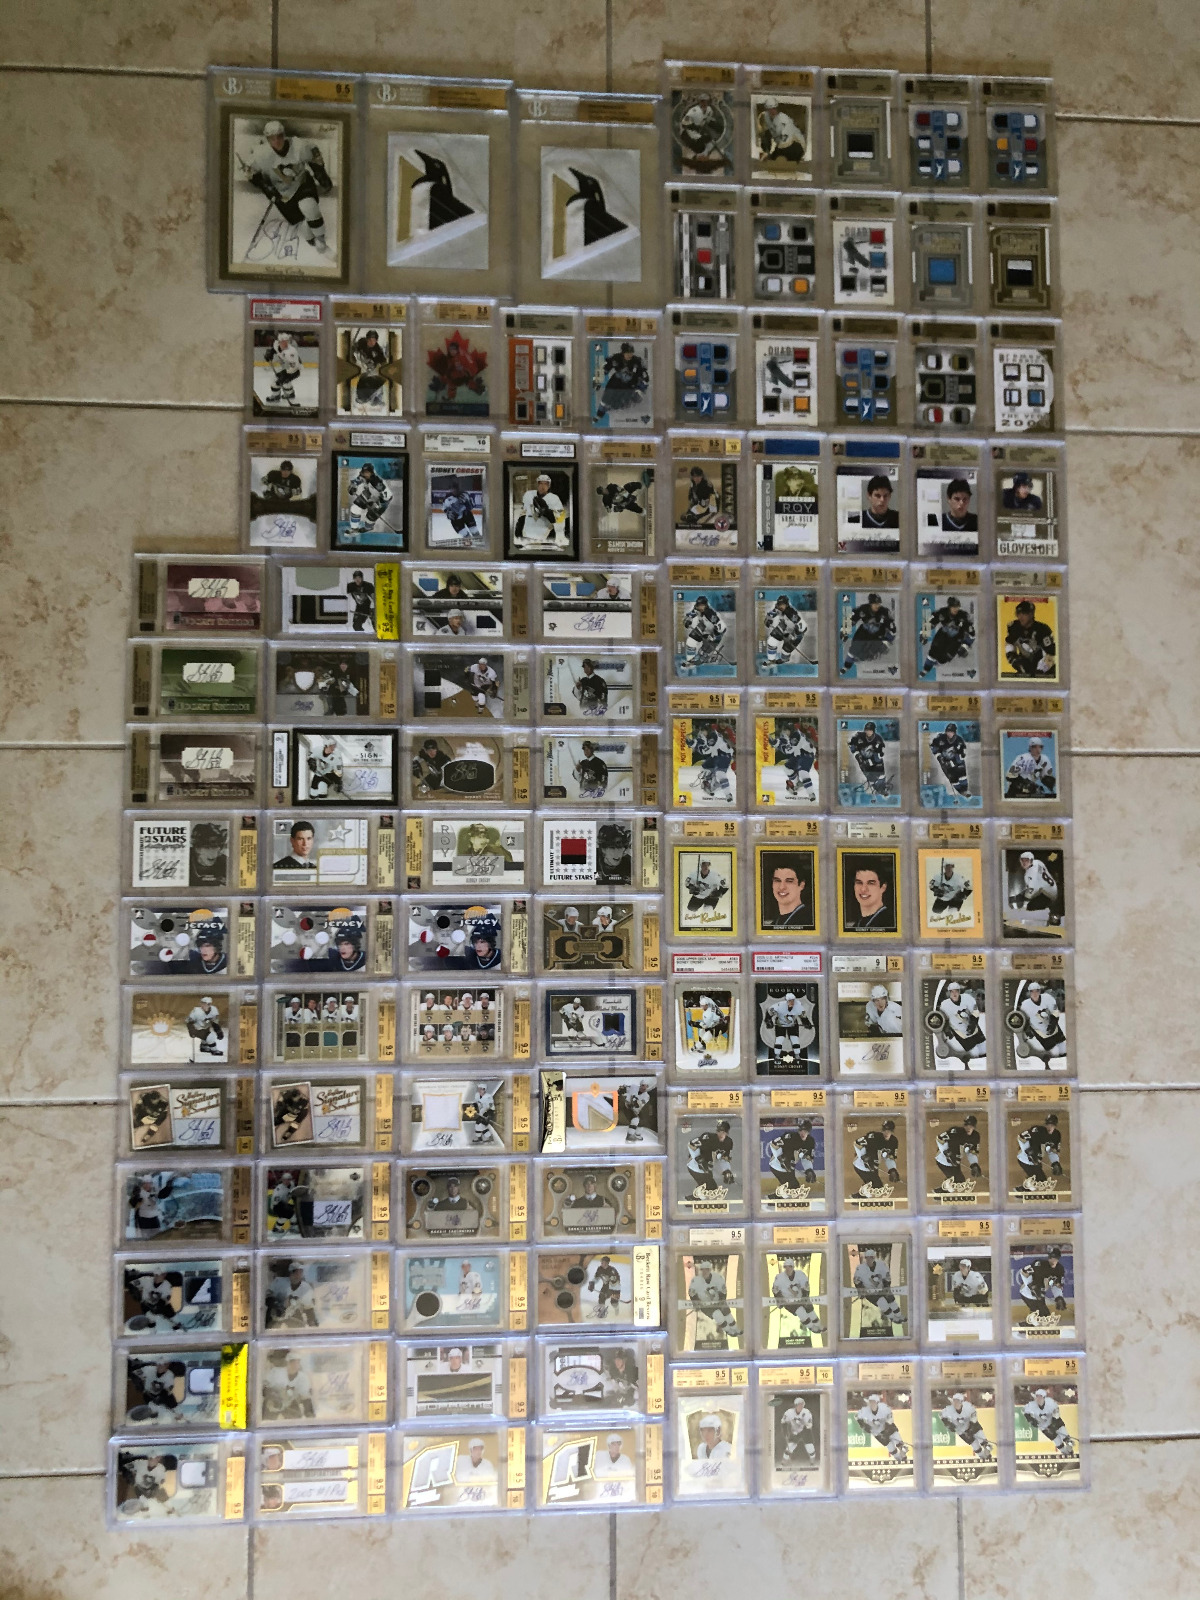 2005-06 SIDNEY CROSBY RC LOT AUTO PATCH JERSEY STICK PUCK BGS 10,9.5 (938 CARDS)